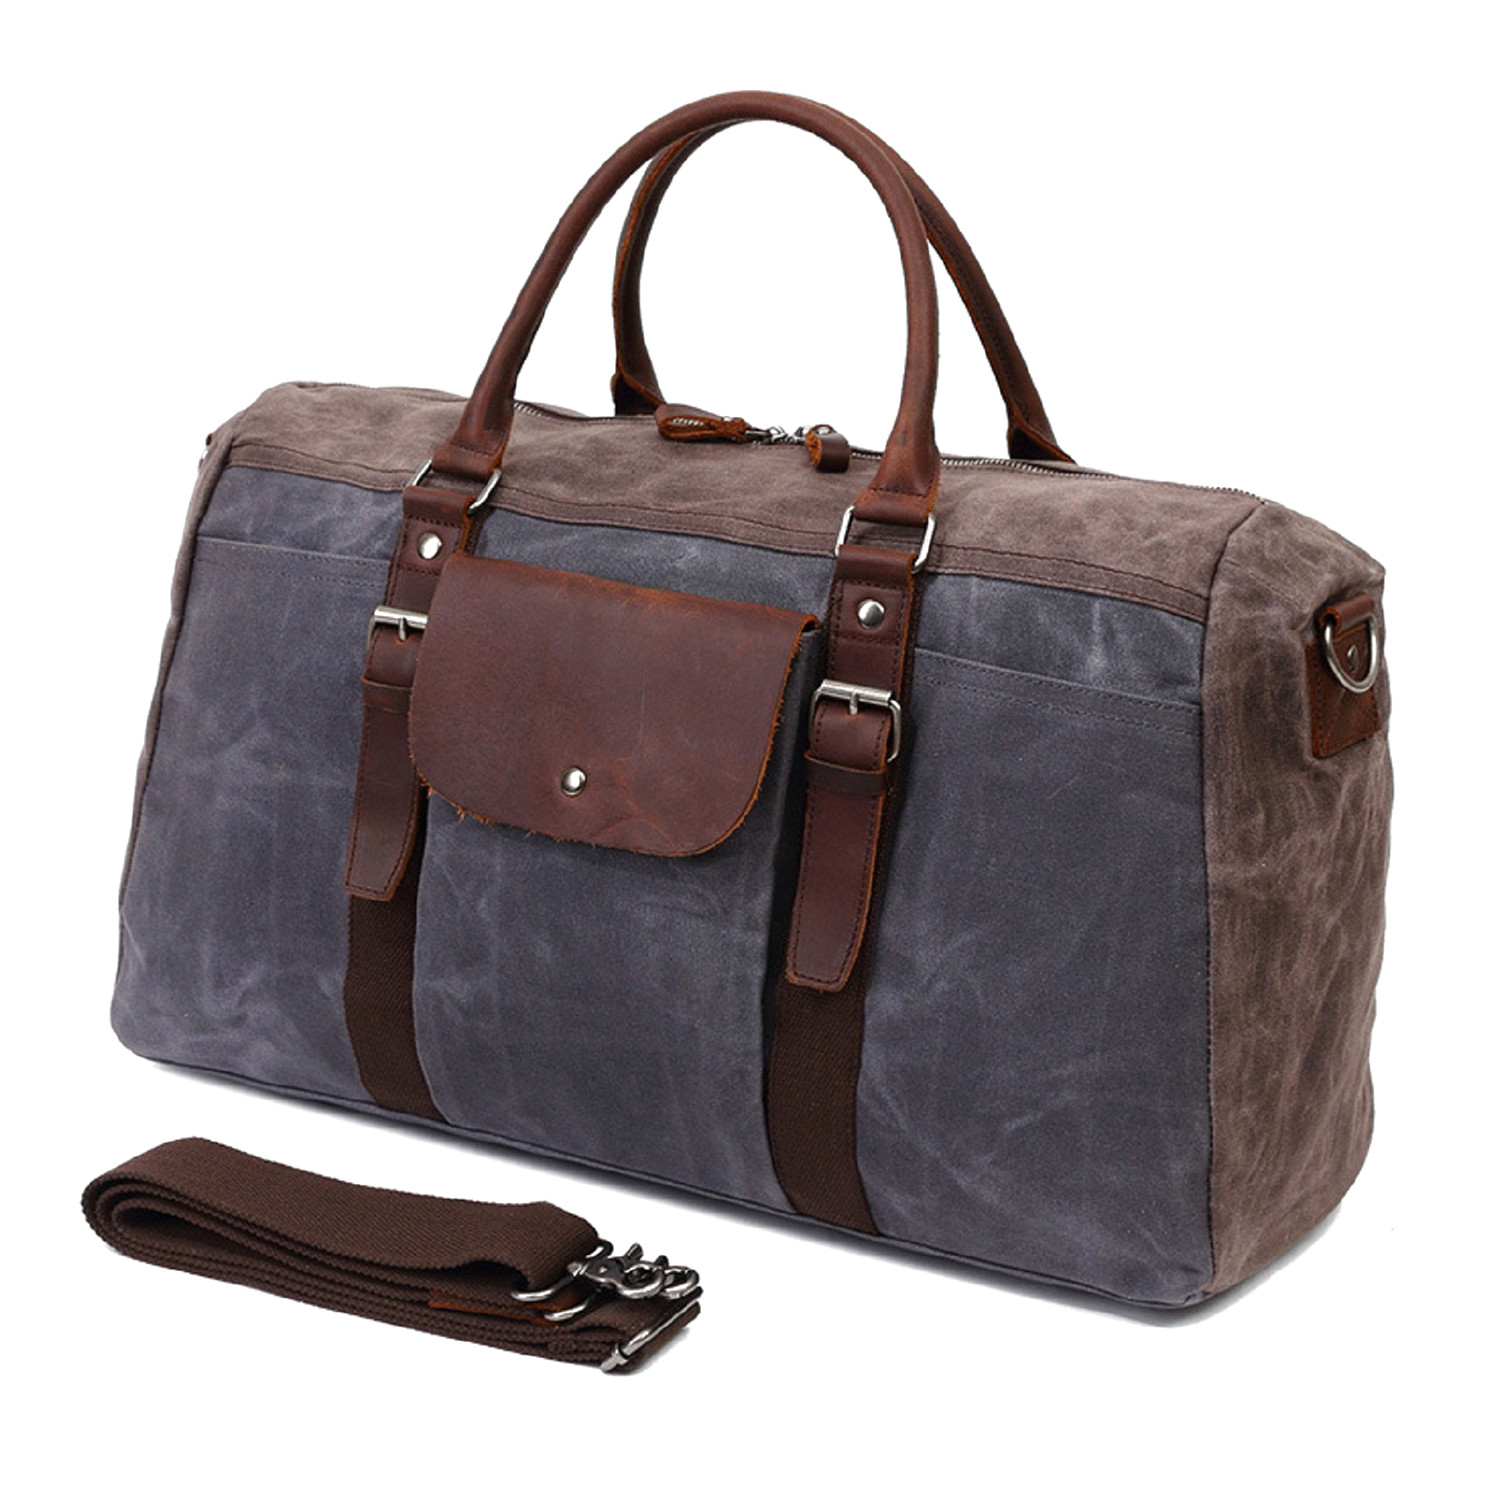 Duffel Bag With Front Pocket // Gray - OwnBag - Touch of Modern